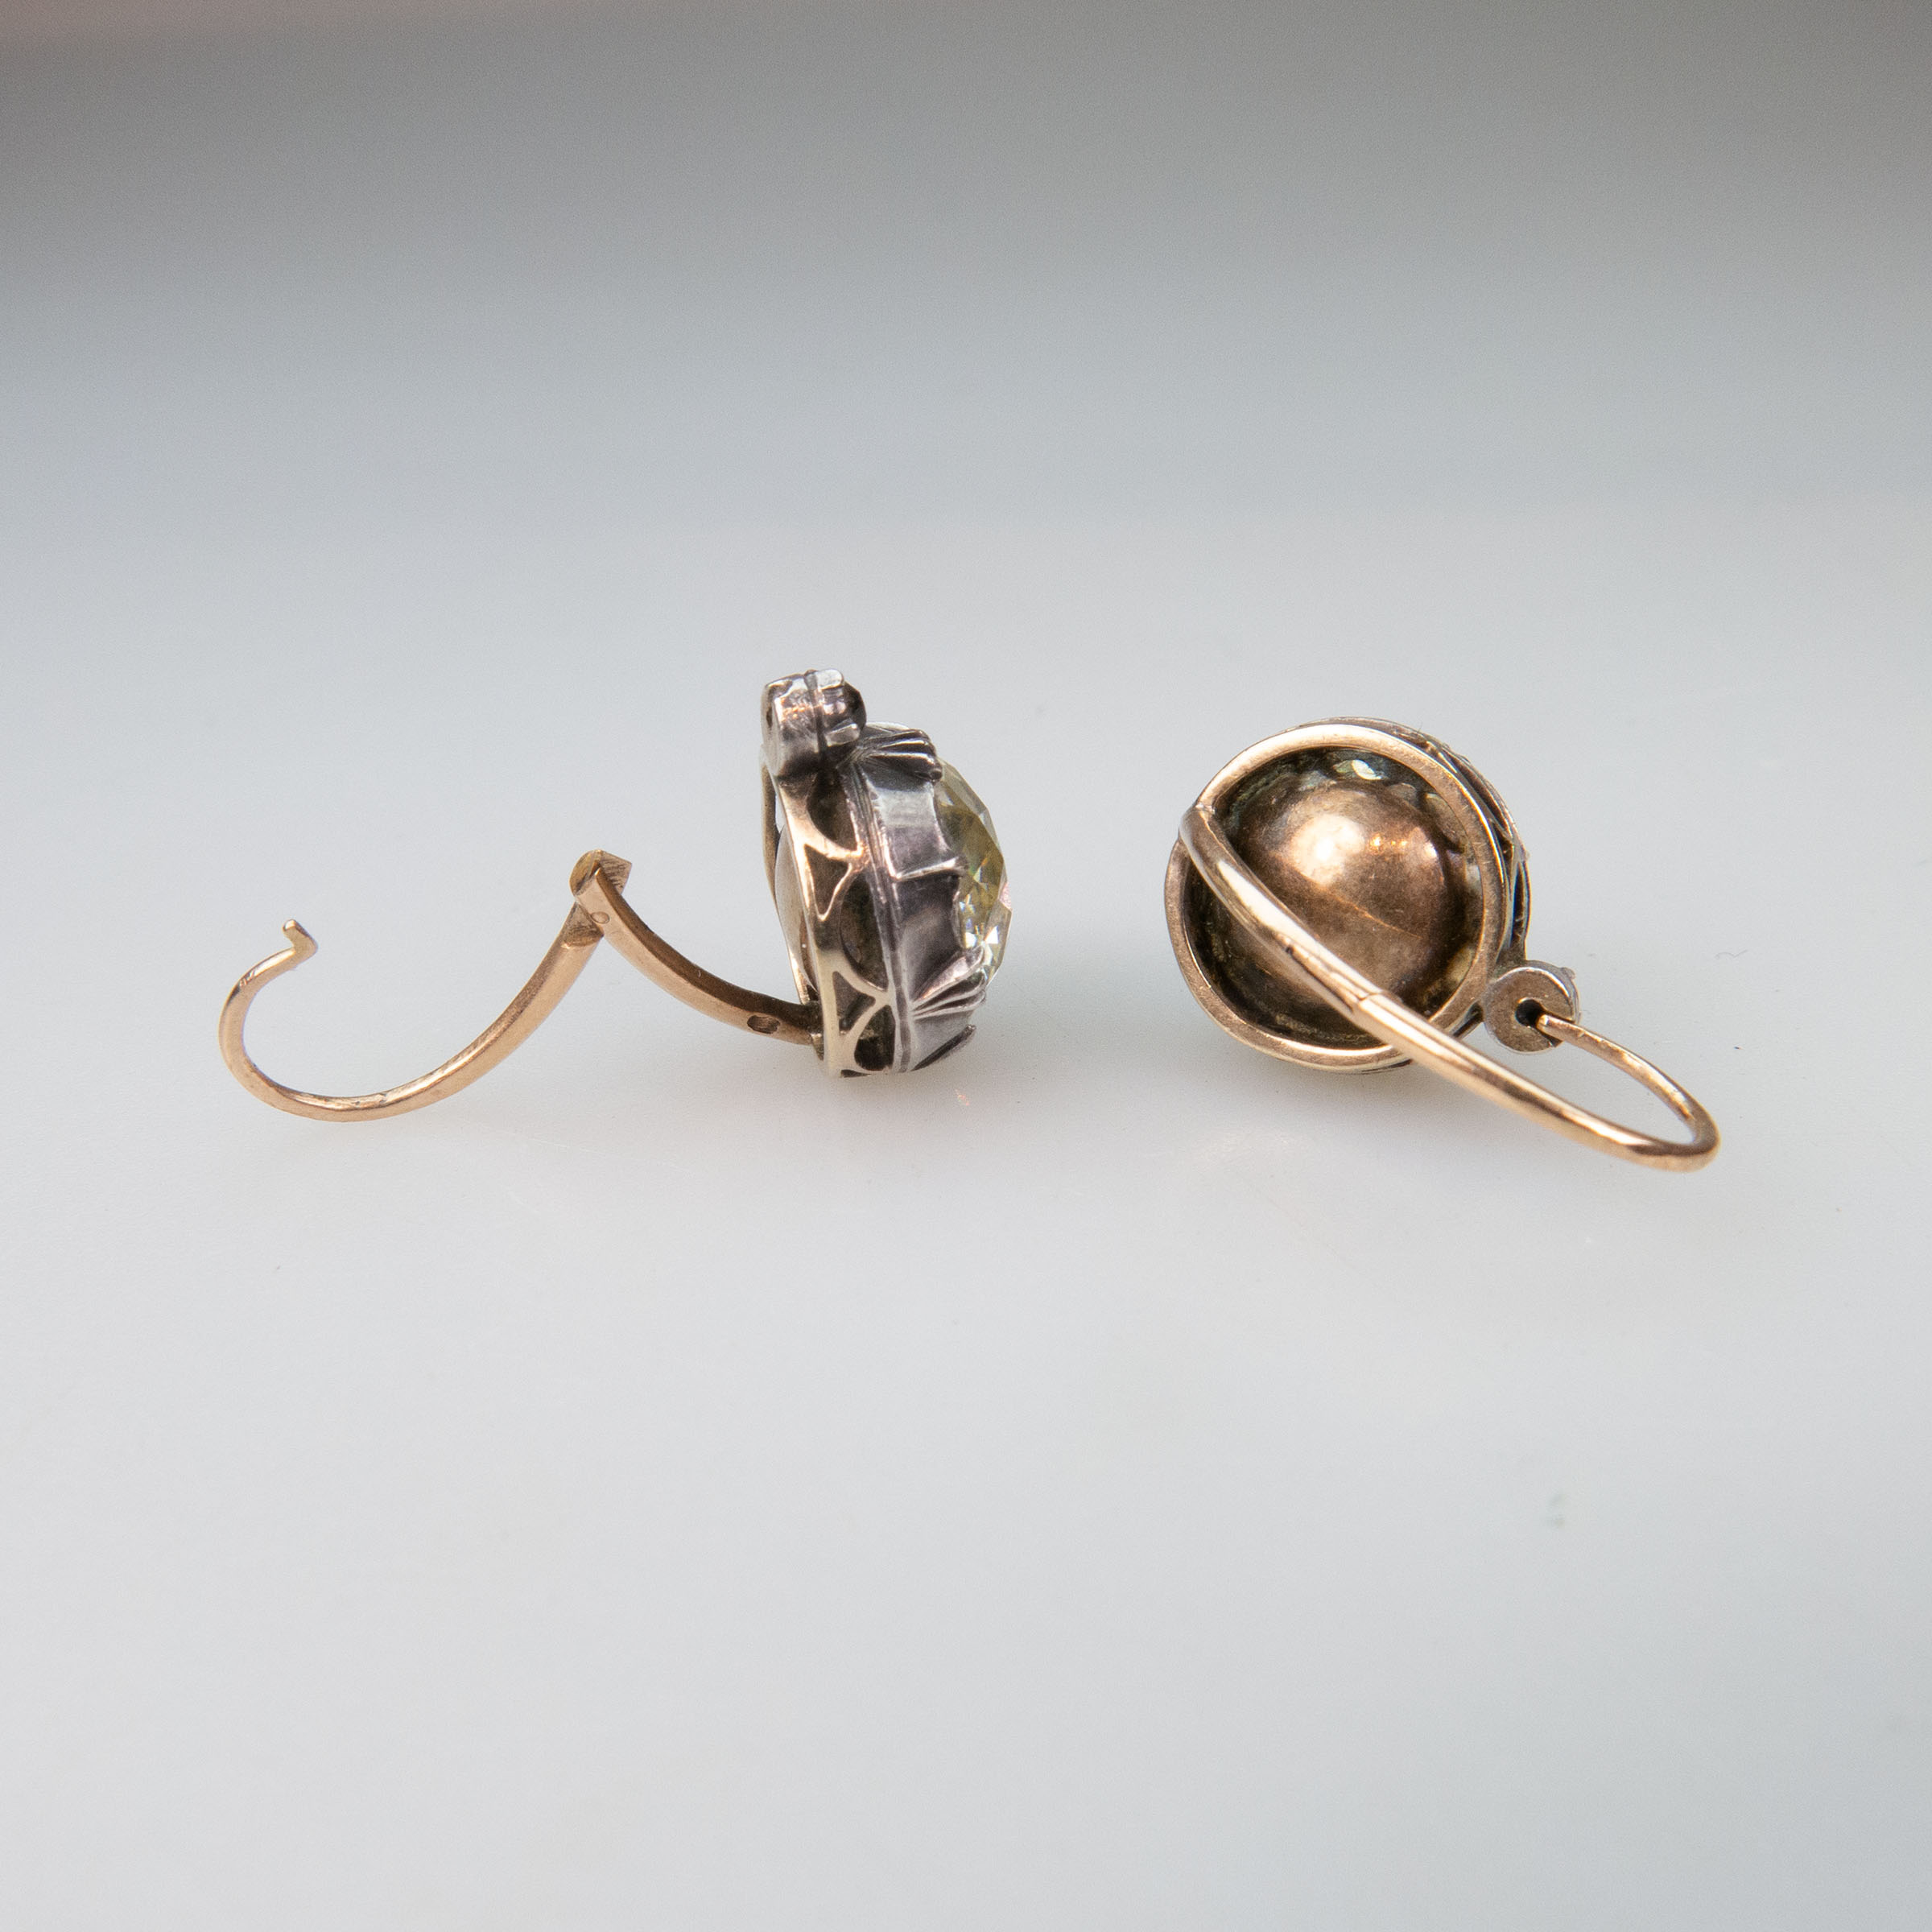 Pair Of 19th Century French 18k Gold And Silver Hook-Back Earrings